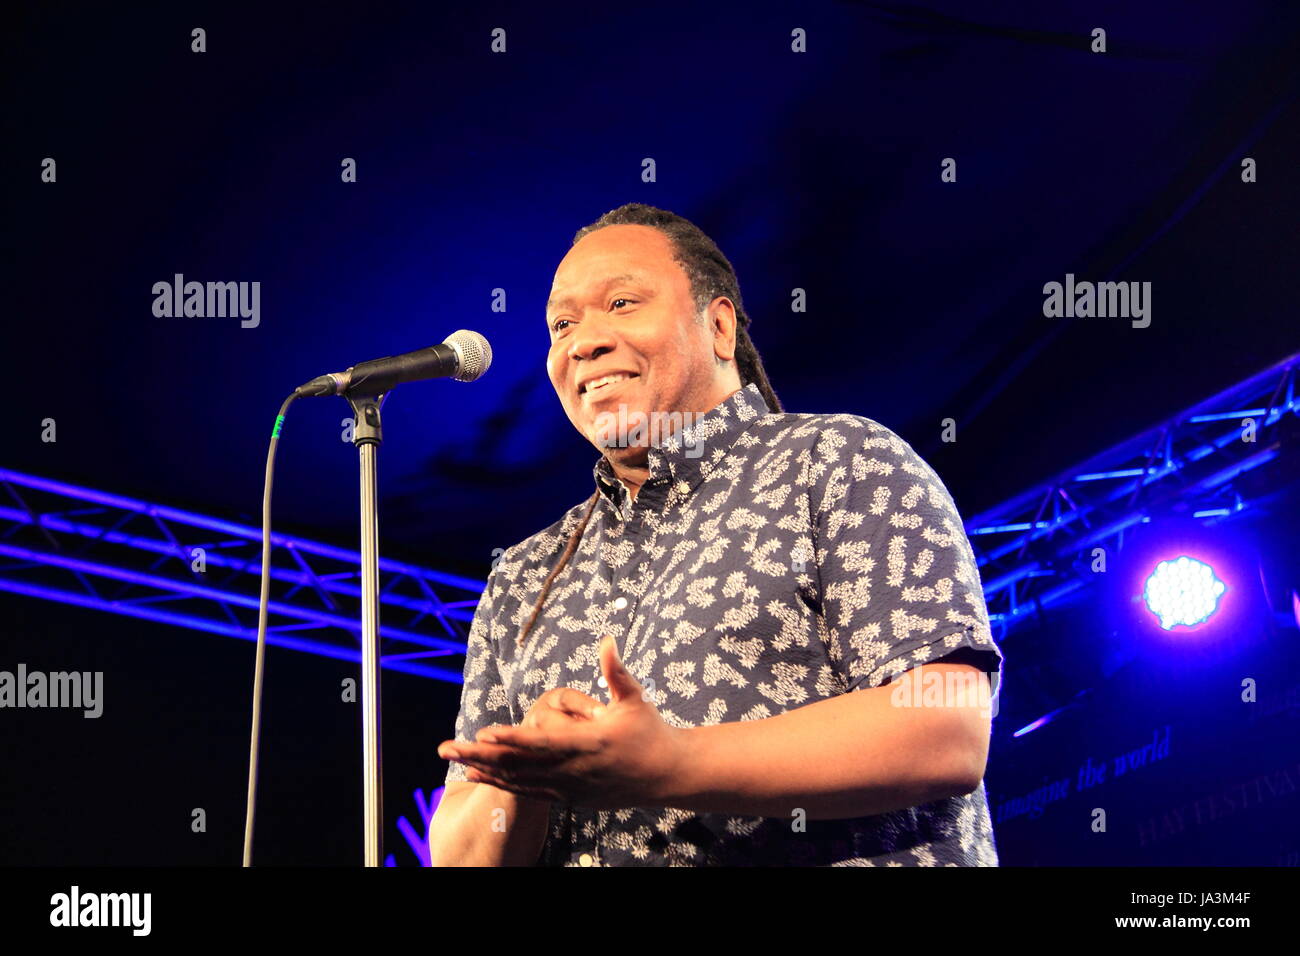 Reginald D Hunter at the Oxfam Moot, Hay Festival 2017, Hay-on-Wye, Brecknockshire, Powys, Wales, Great Britain, United Kingdom, UK, Europe Stock Photo